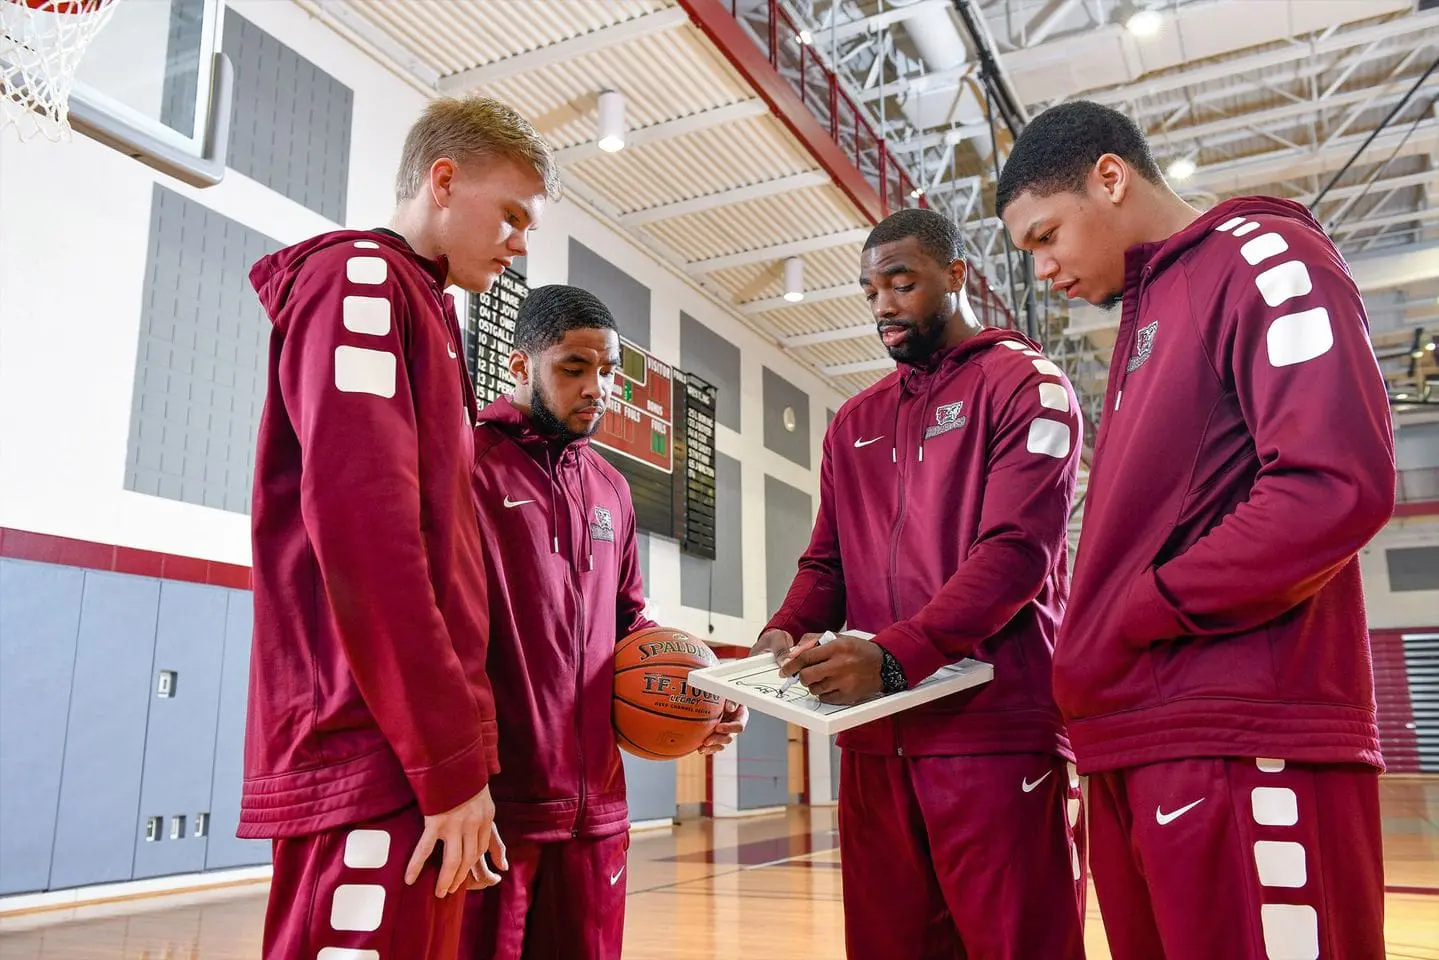 Thaddeus Stevens College basketball coach goes over plays with team members.